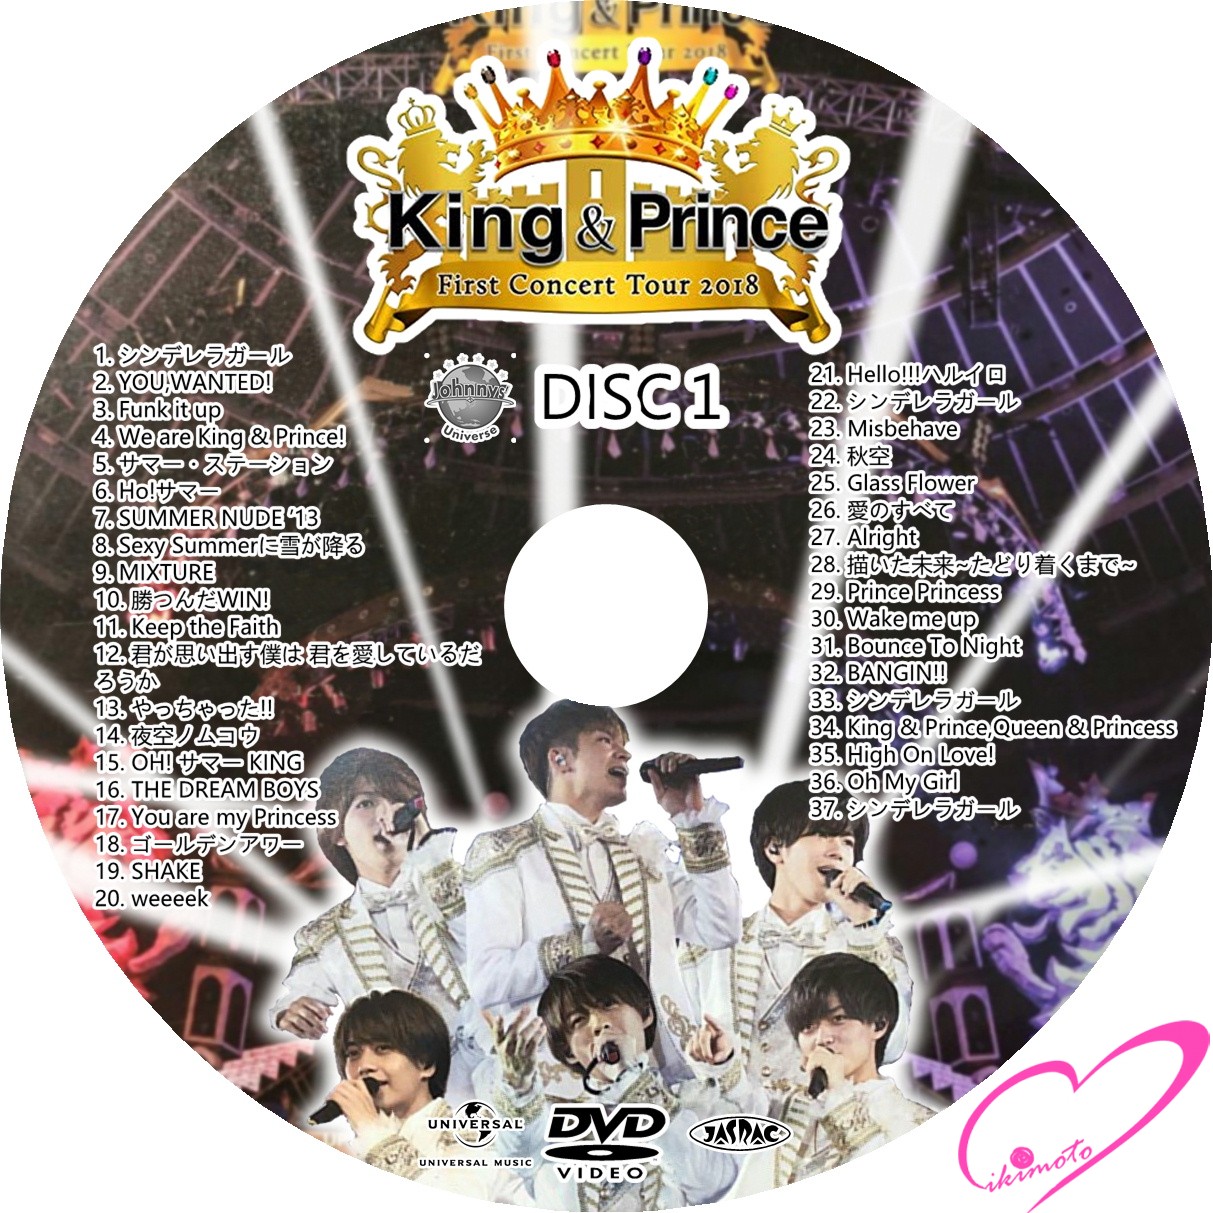 King & Prince First Concert Tour 2018 (通常盤) - 自己れ～べる